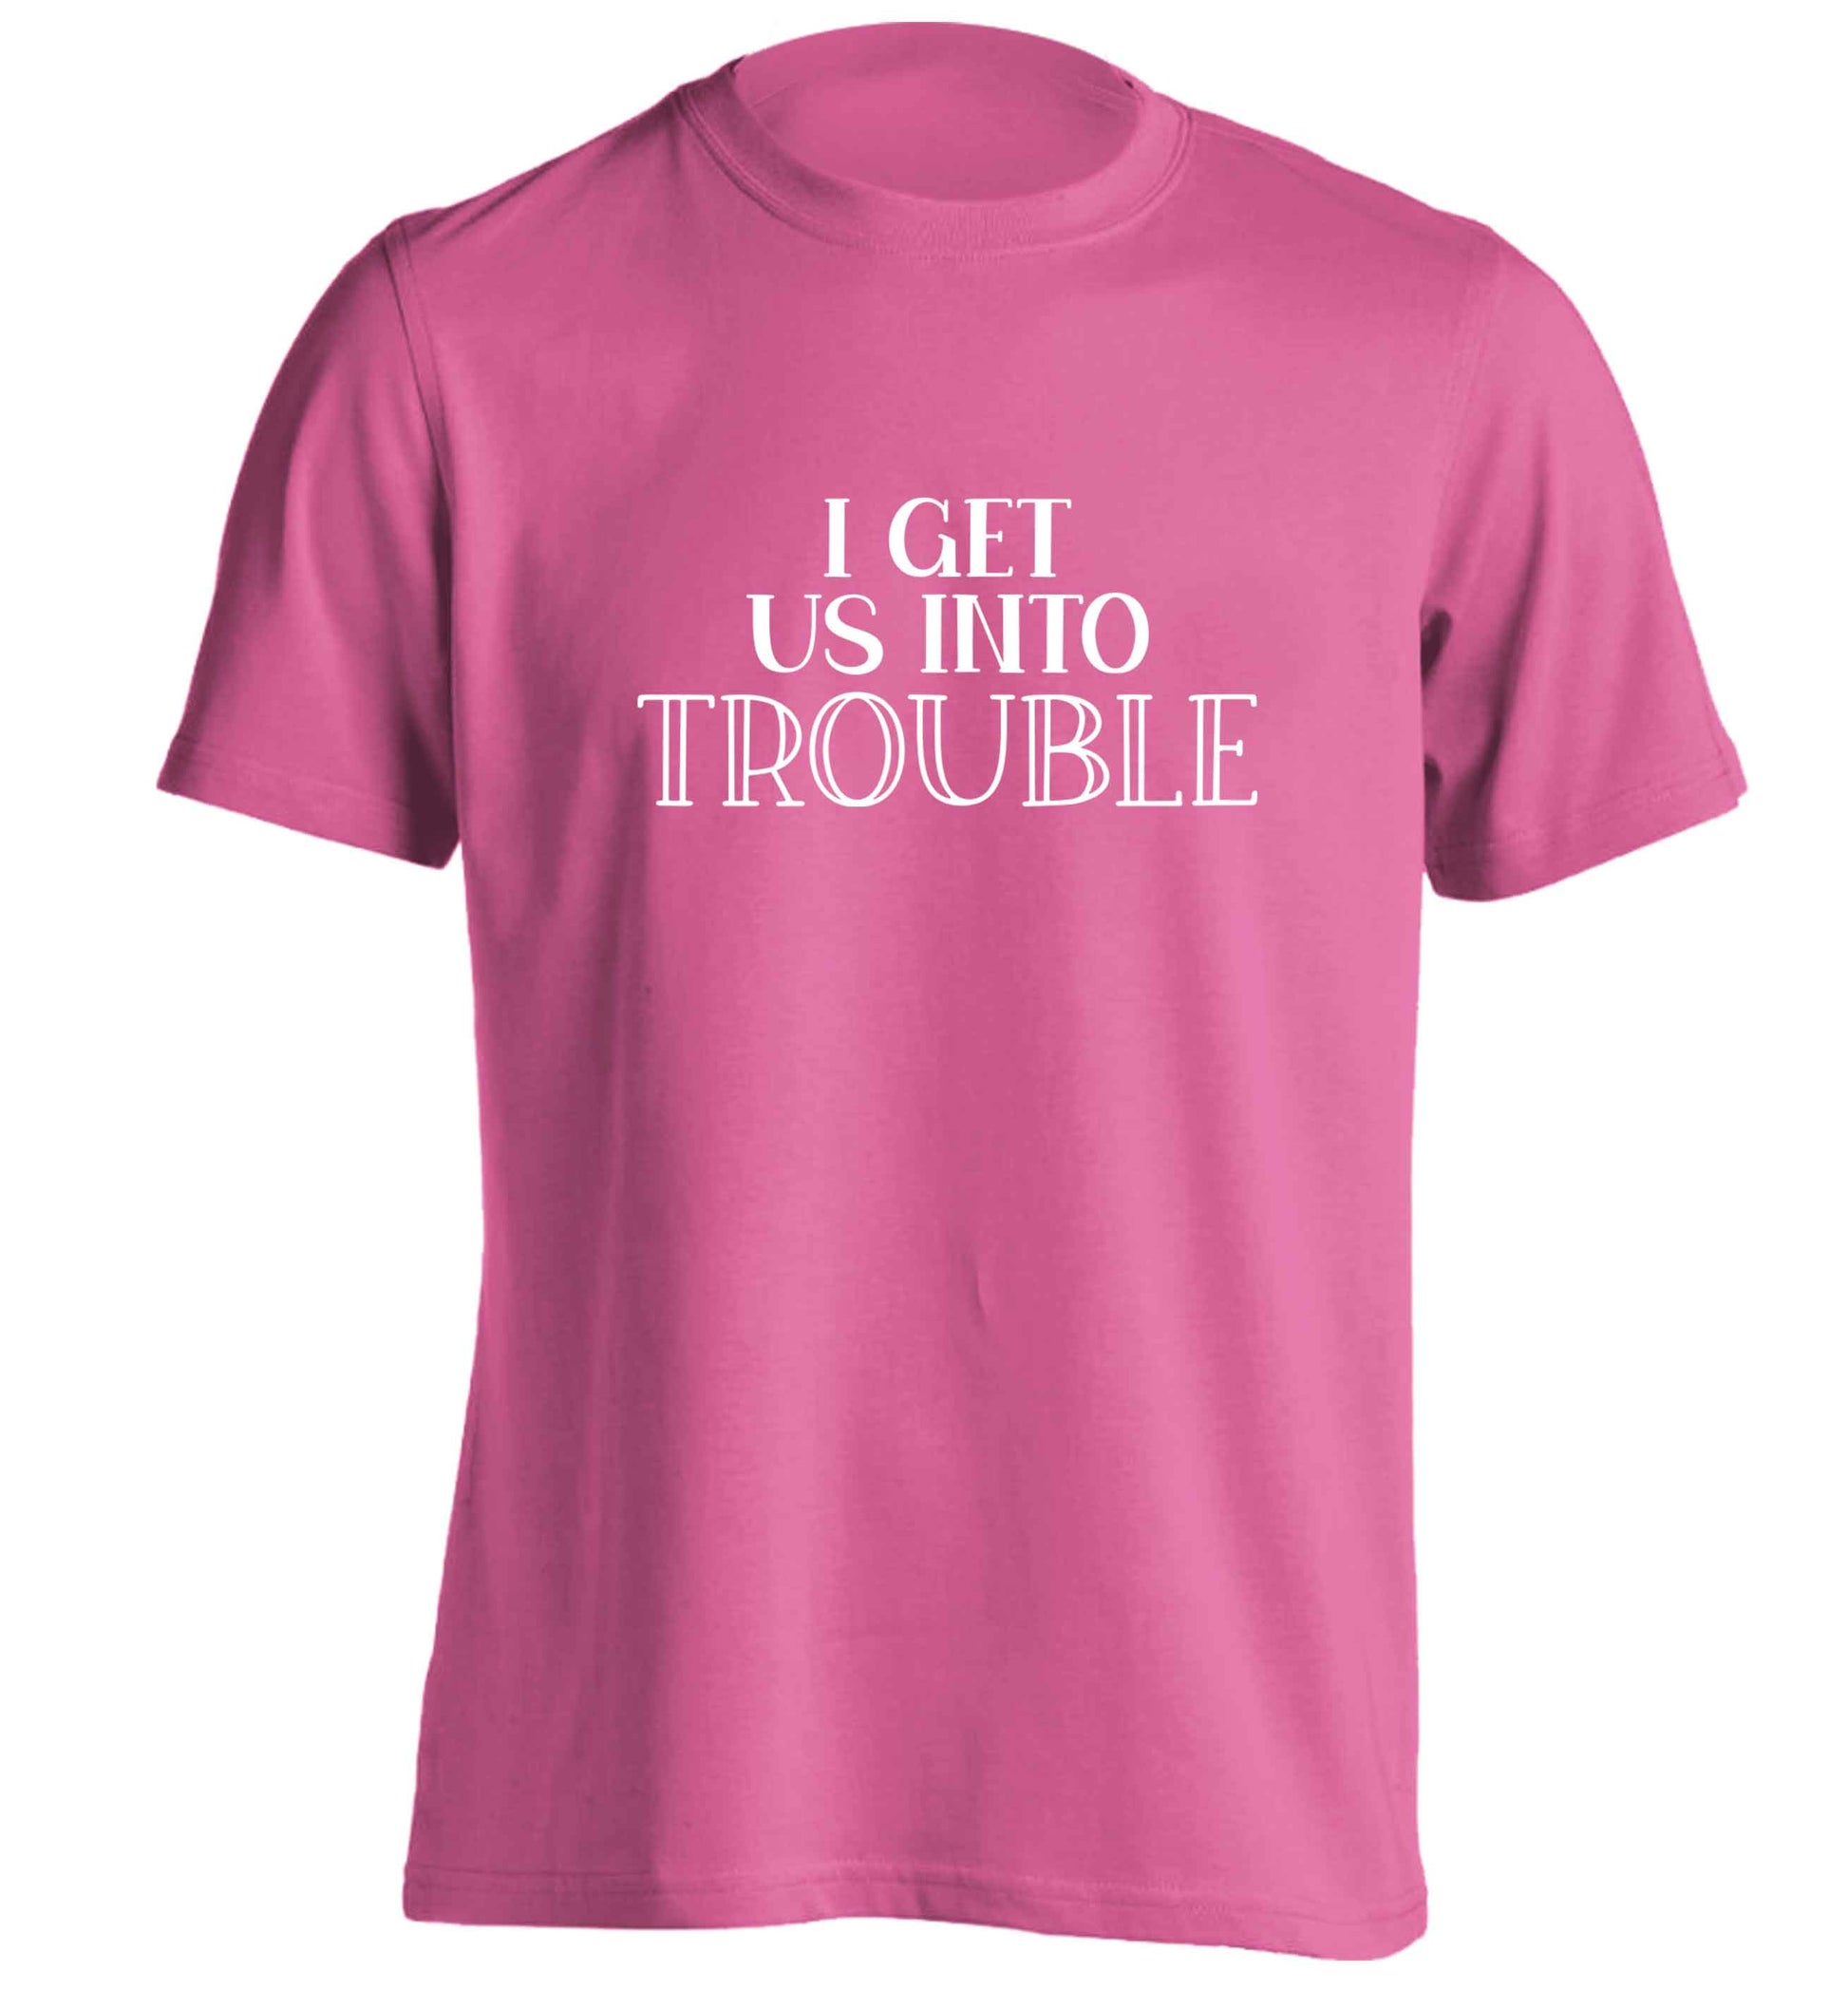 I get us into trouble adults unisex pink Tshirt 2XL